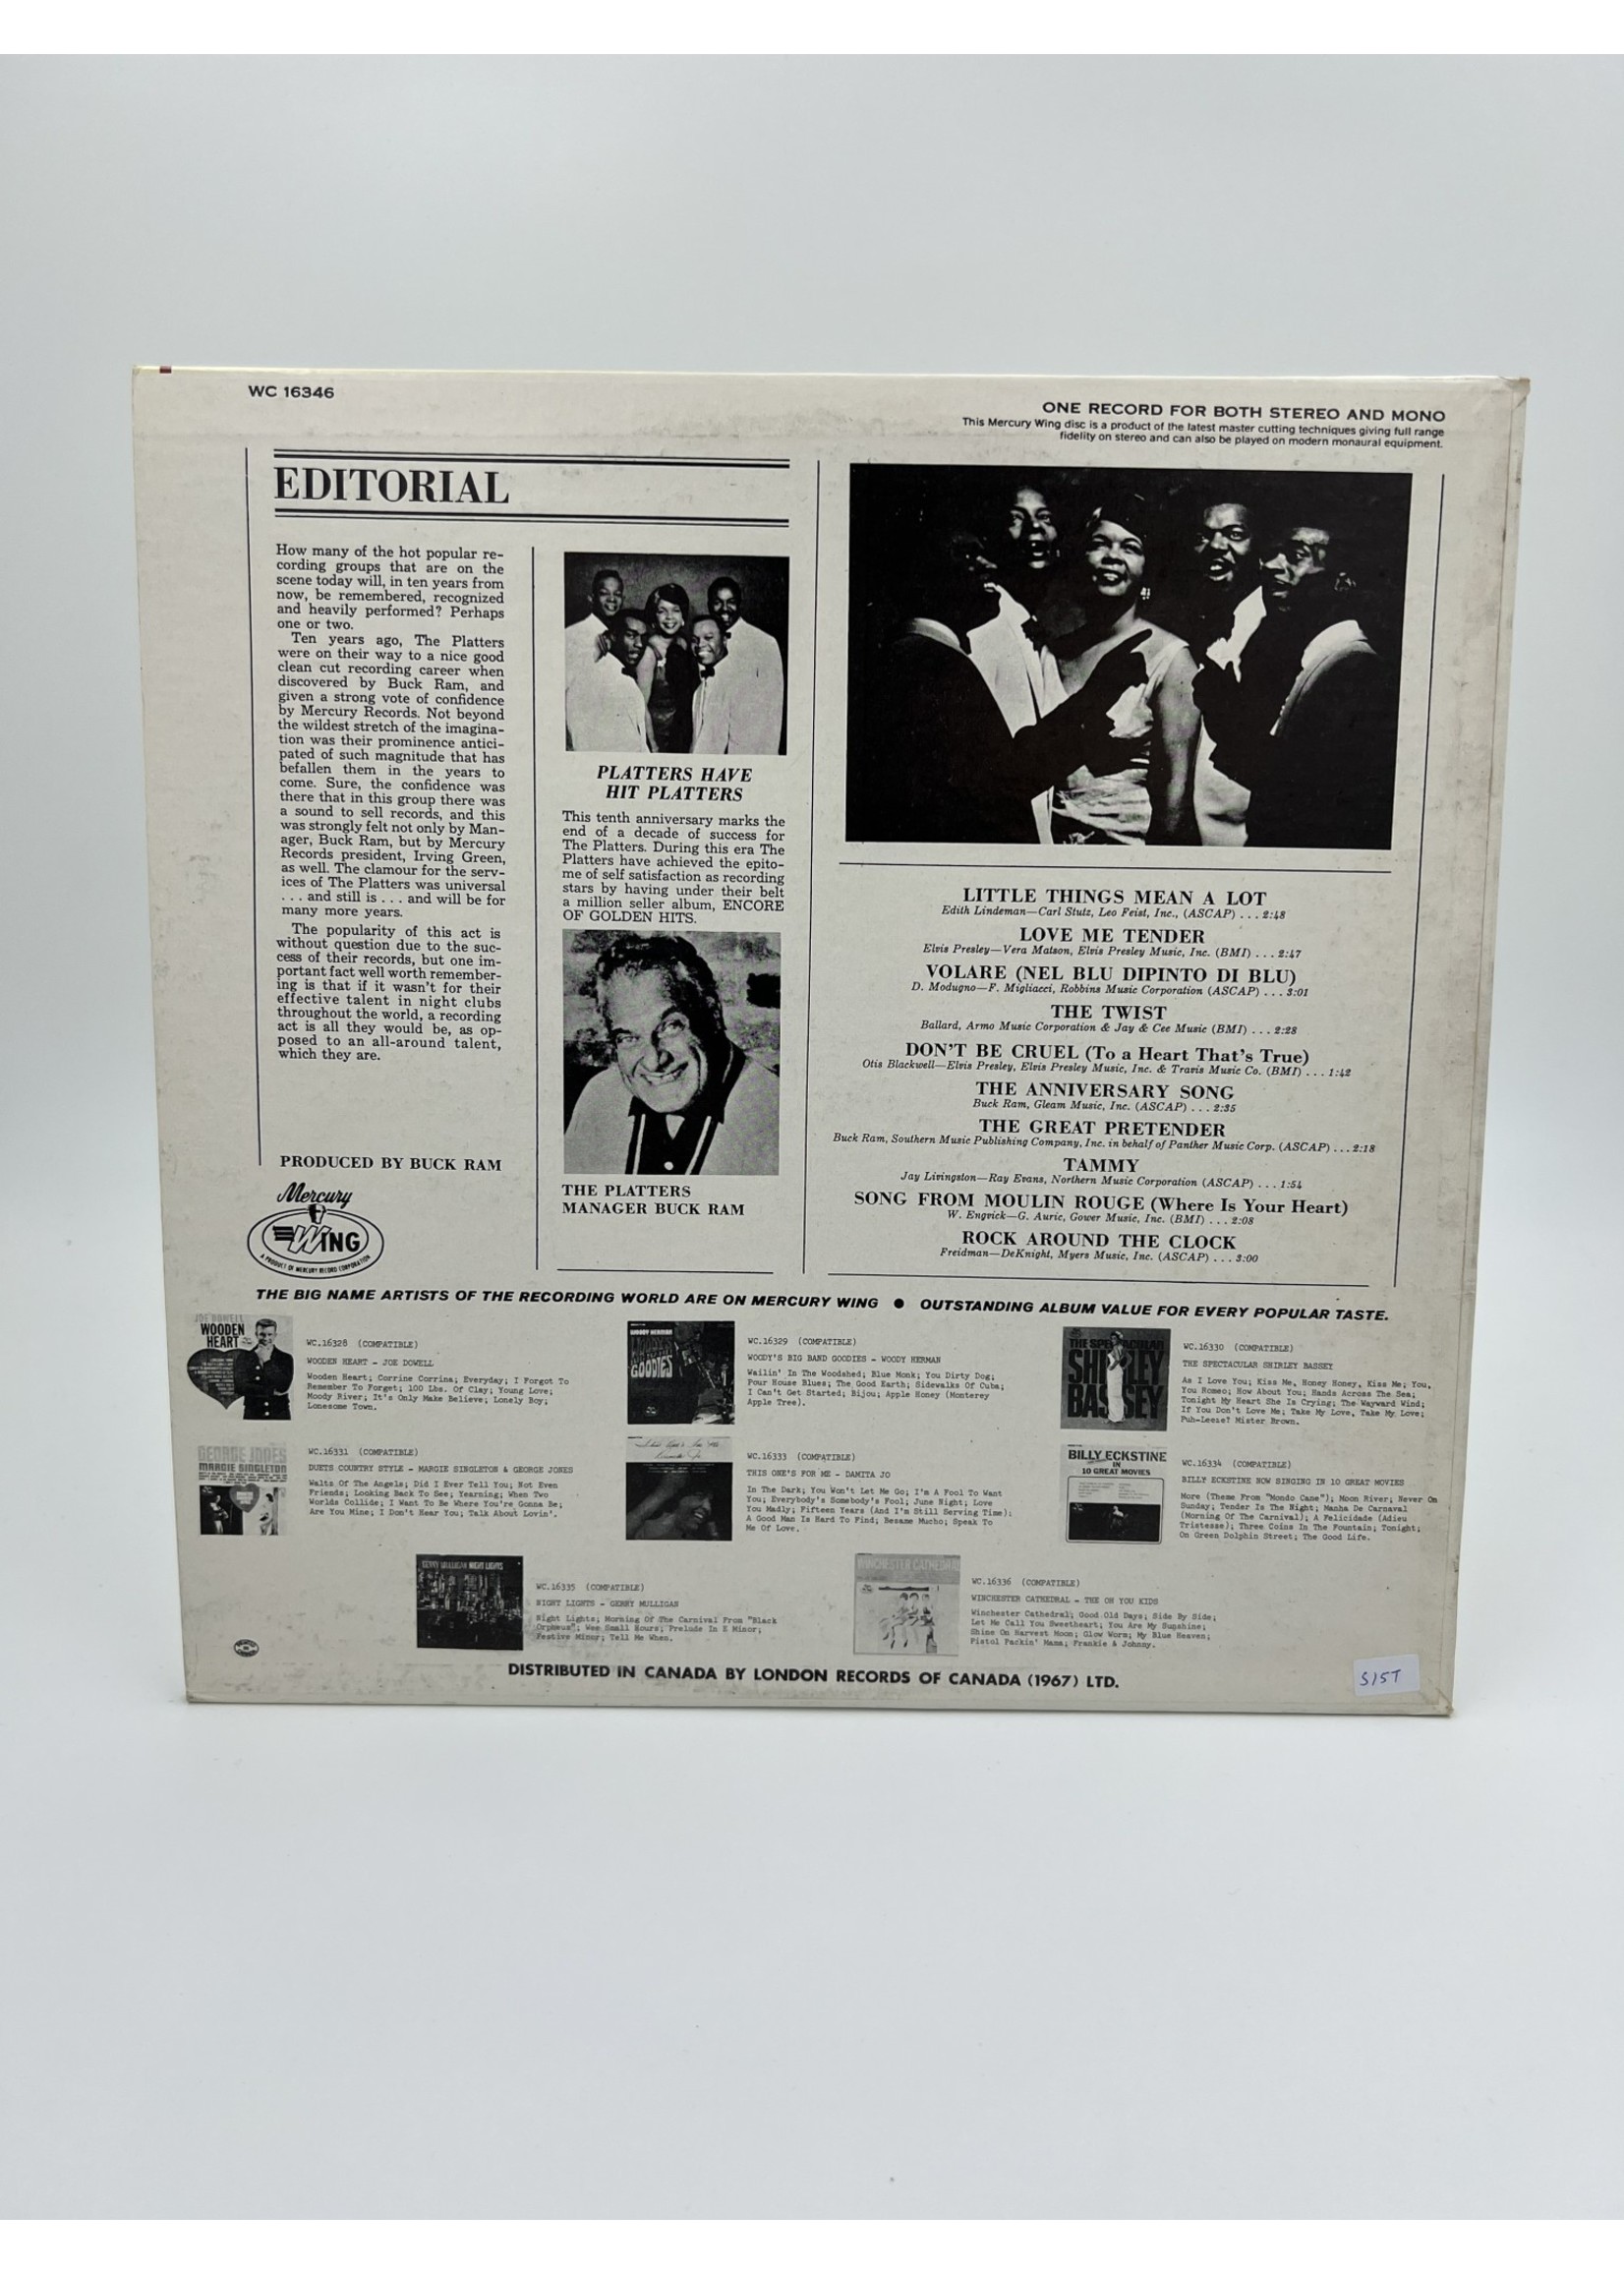 LP The Platters Special Edition 10th Anniversary Album LP RECORD